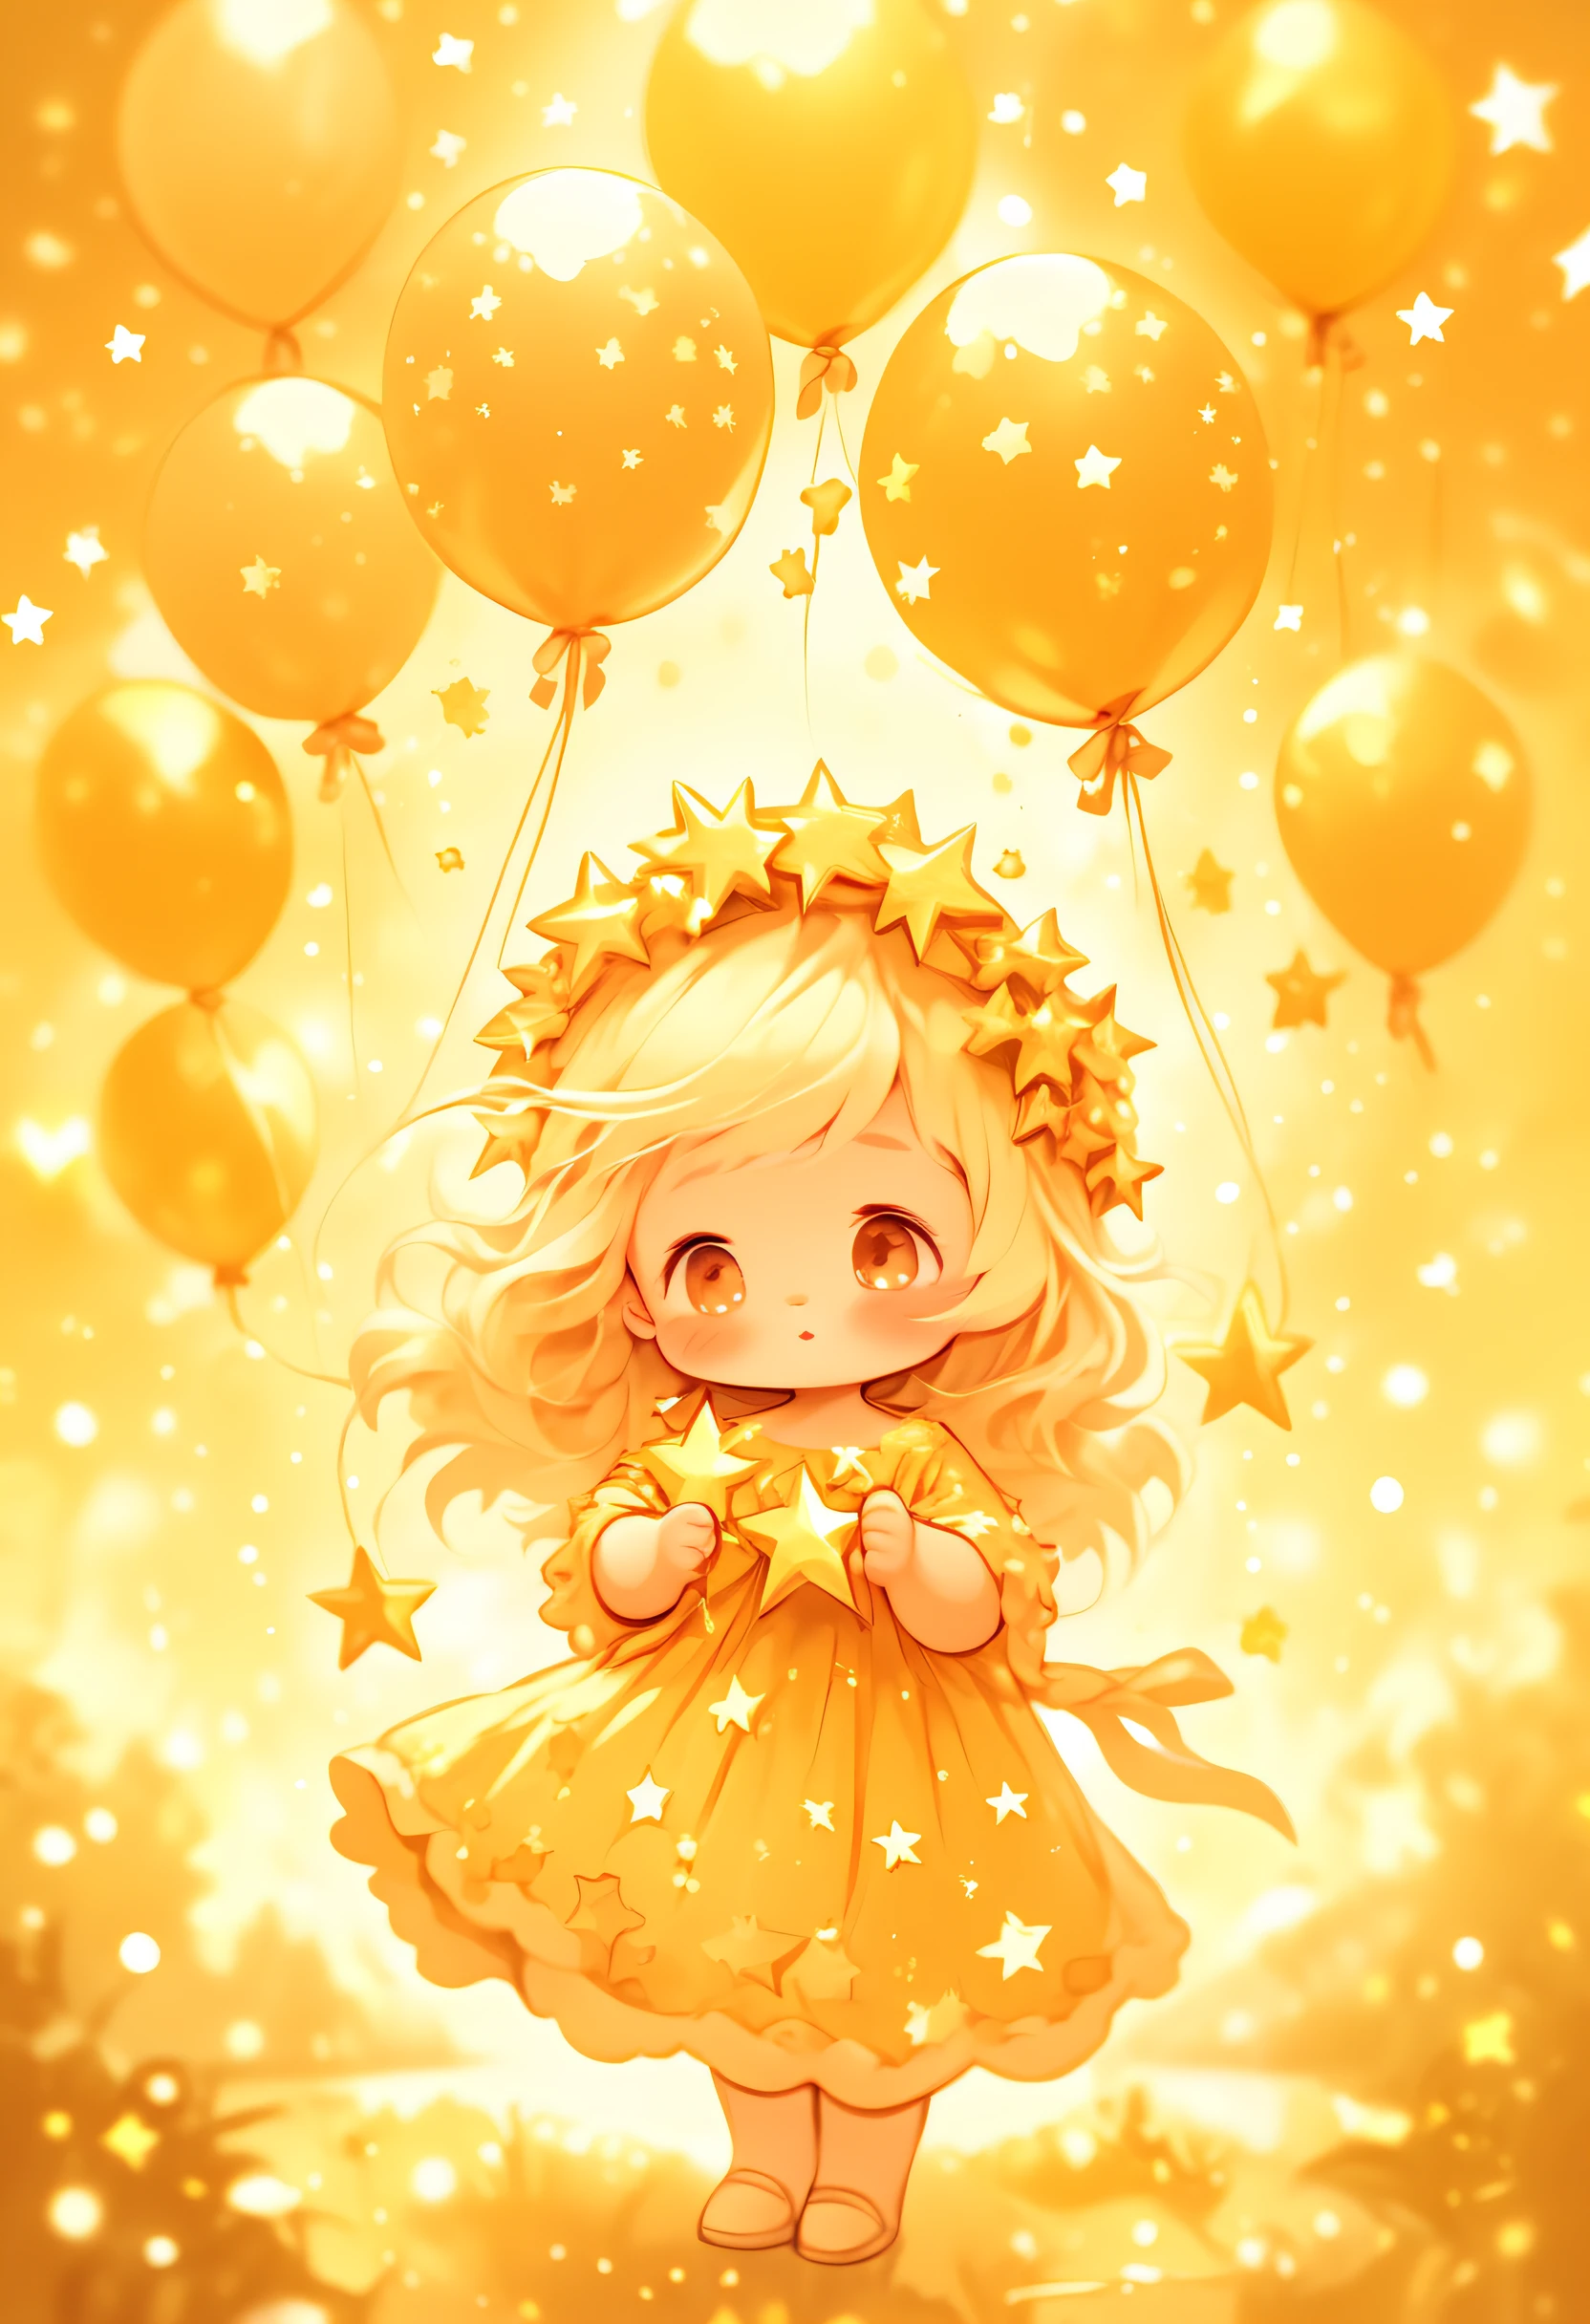 Little angels,Hold the stars, In the style of childlike illustrations, a warm color palette, radiation clusters,Wearing a garland, Star Art,Golden light::0.9, Childhood Arcadias, dolly kei::1.2, amber, skottie young, 32k ULTRAHD